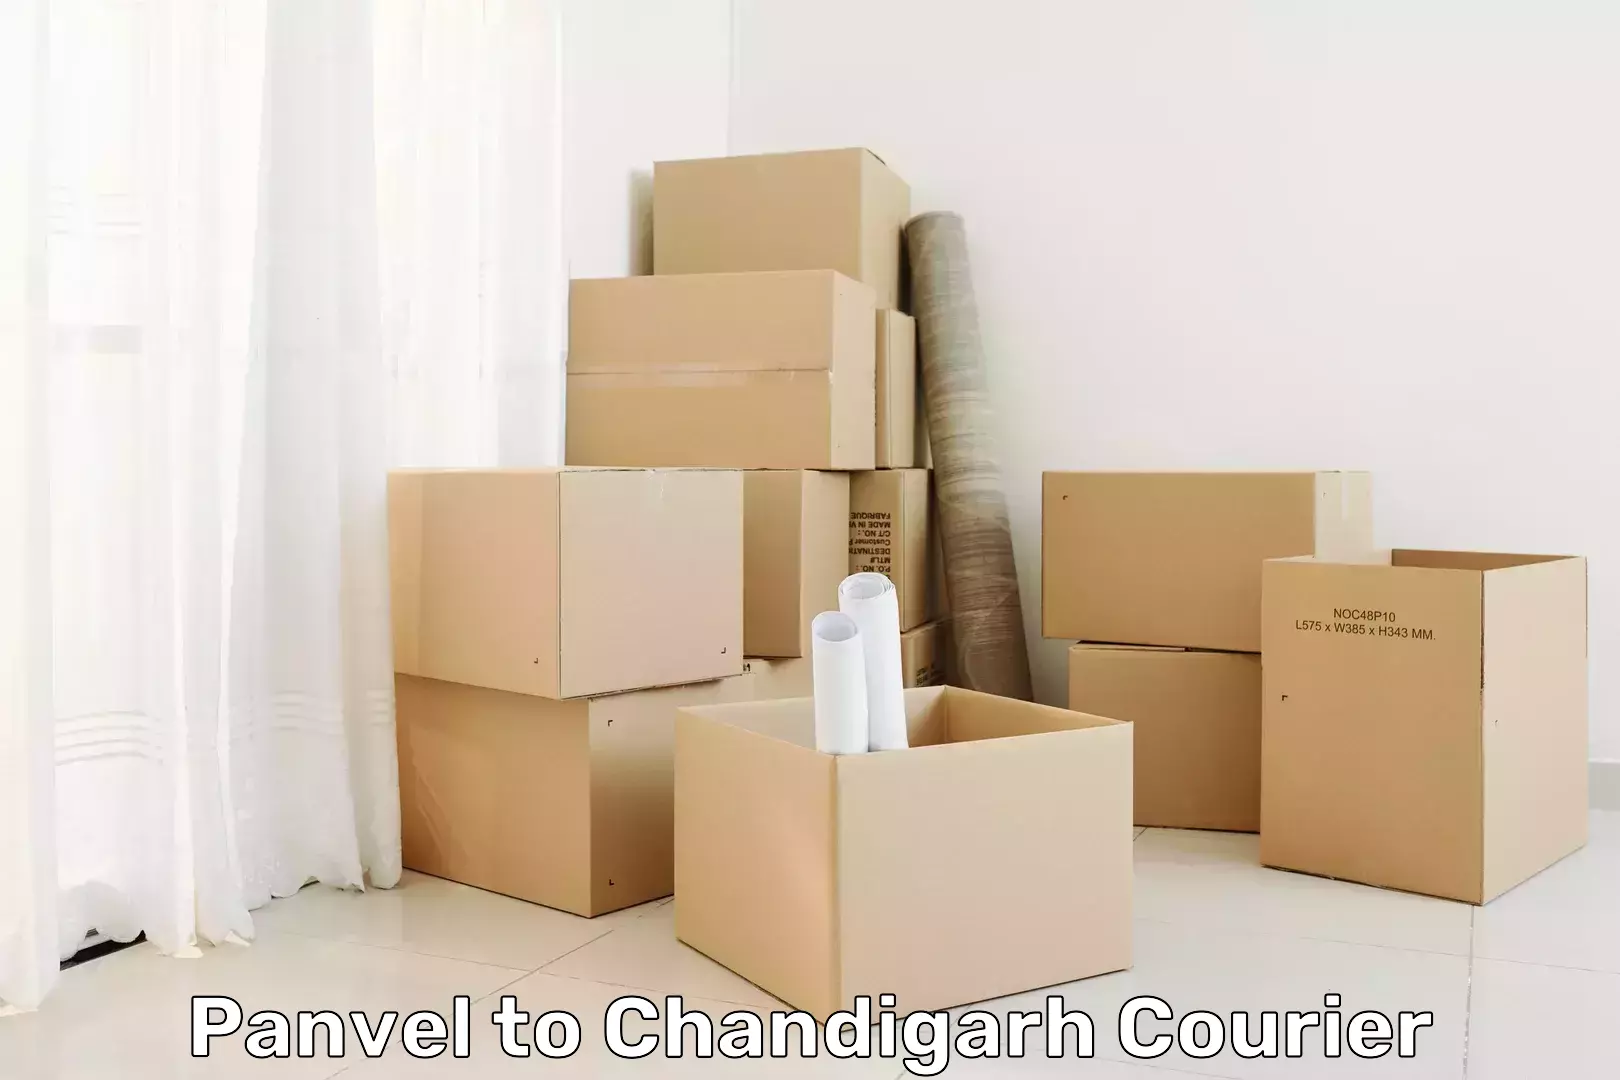 Sustainable delivery practices Panvel to Chandigarh